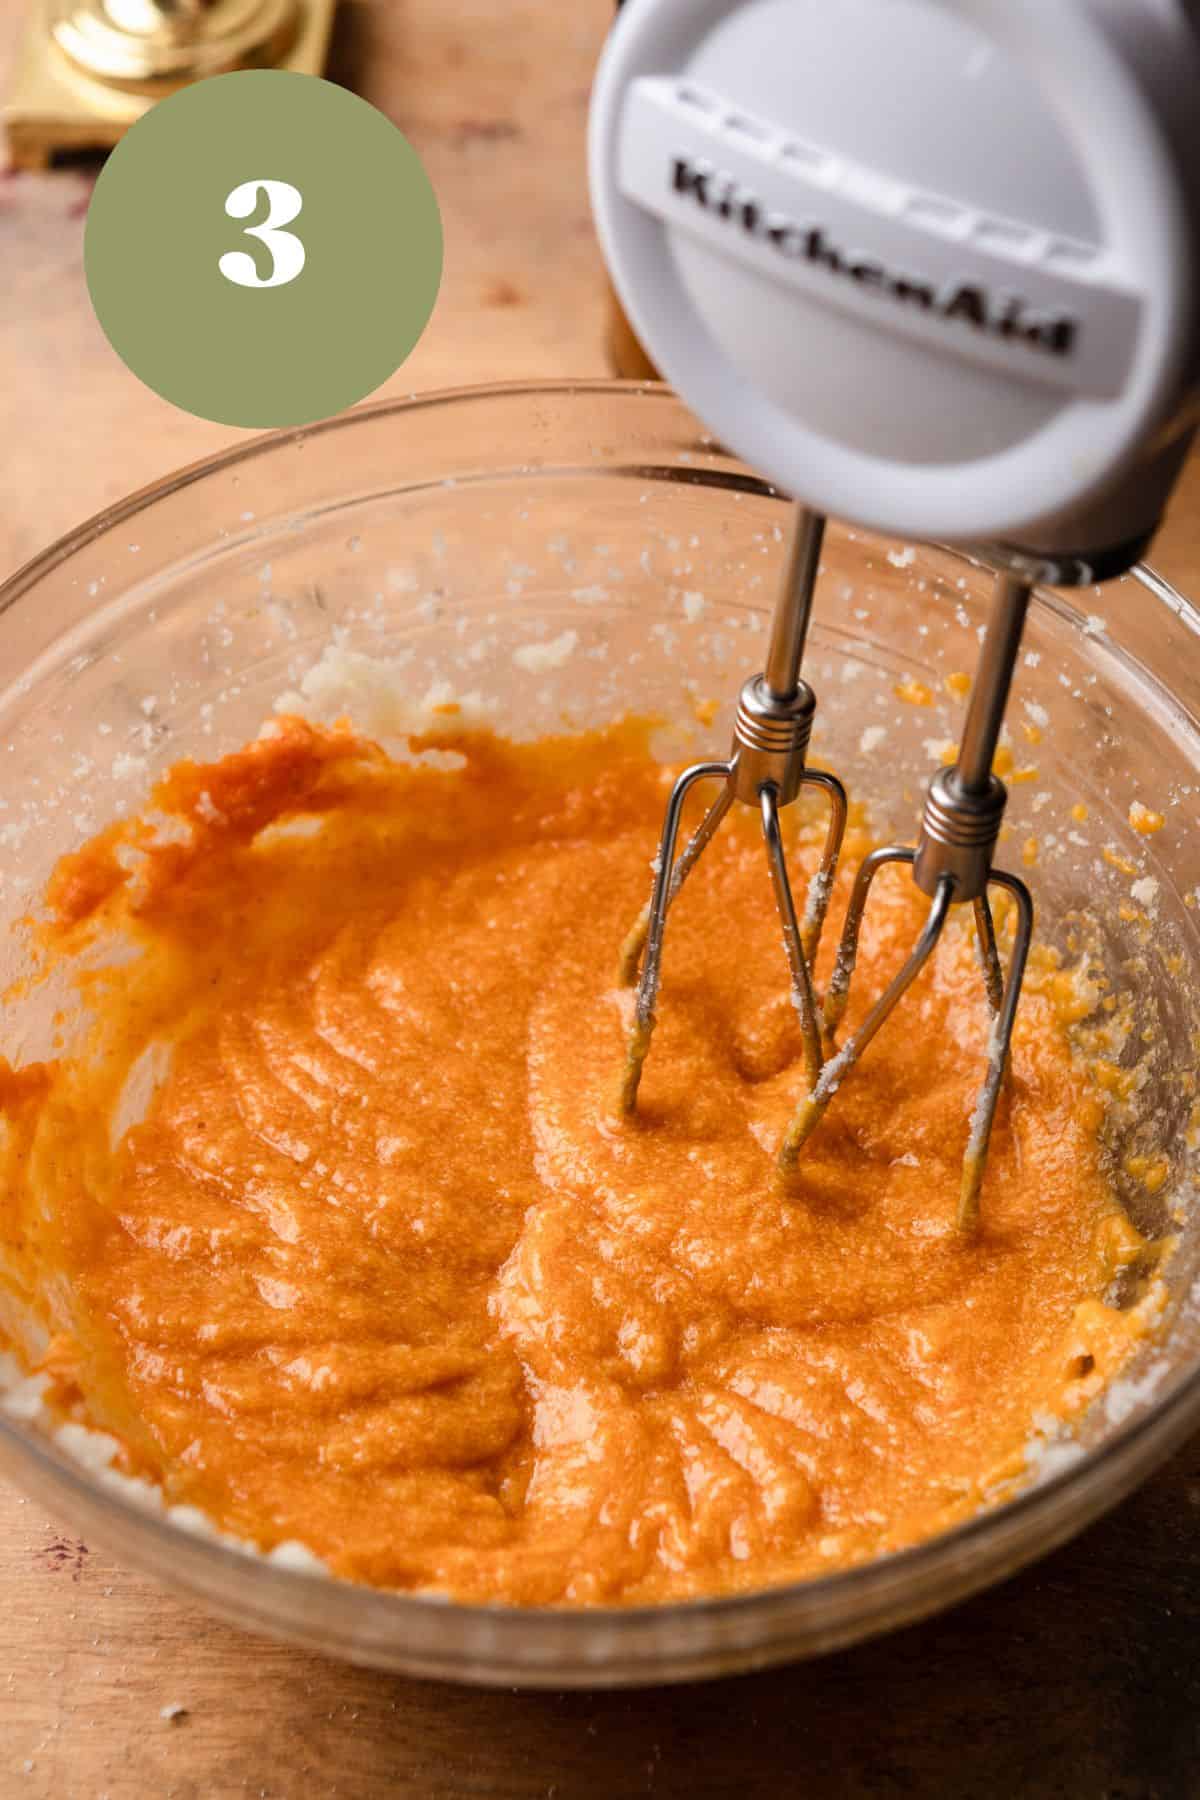 Pumpkin mixed with butter and sugar in a bowl with a handheld mixer.